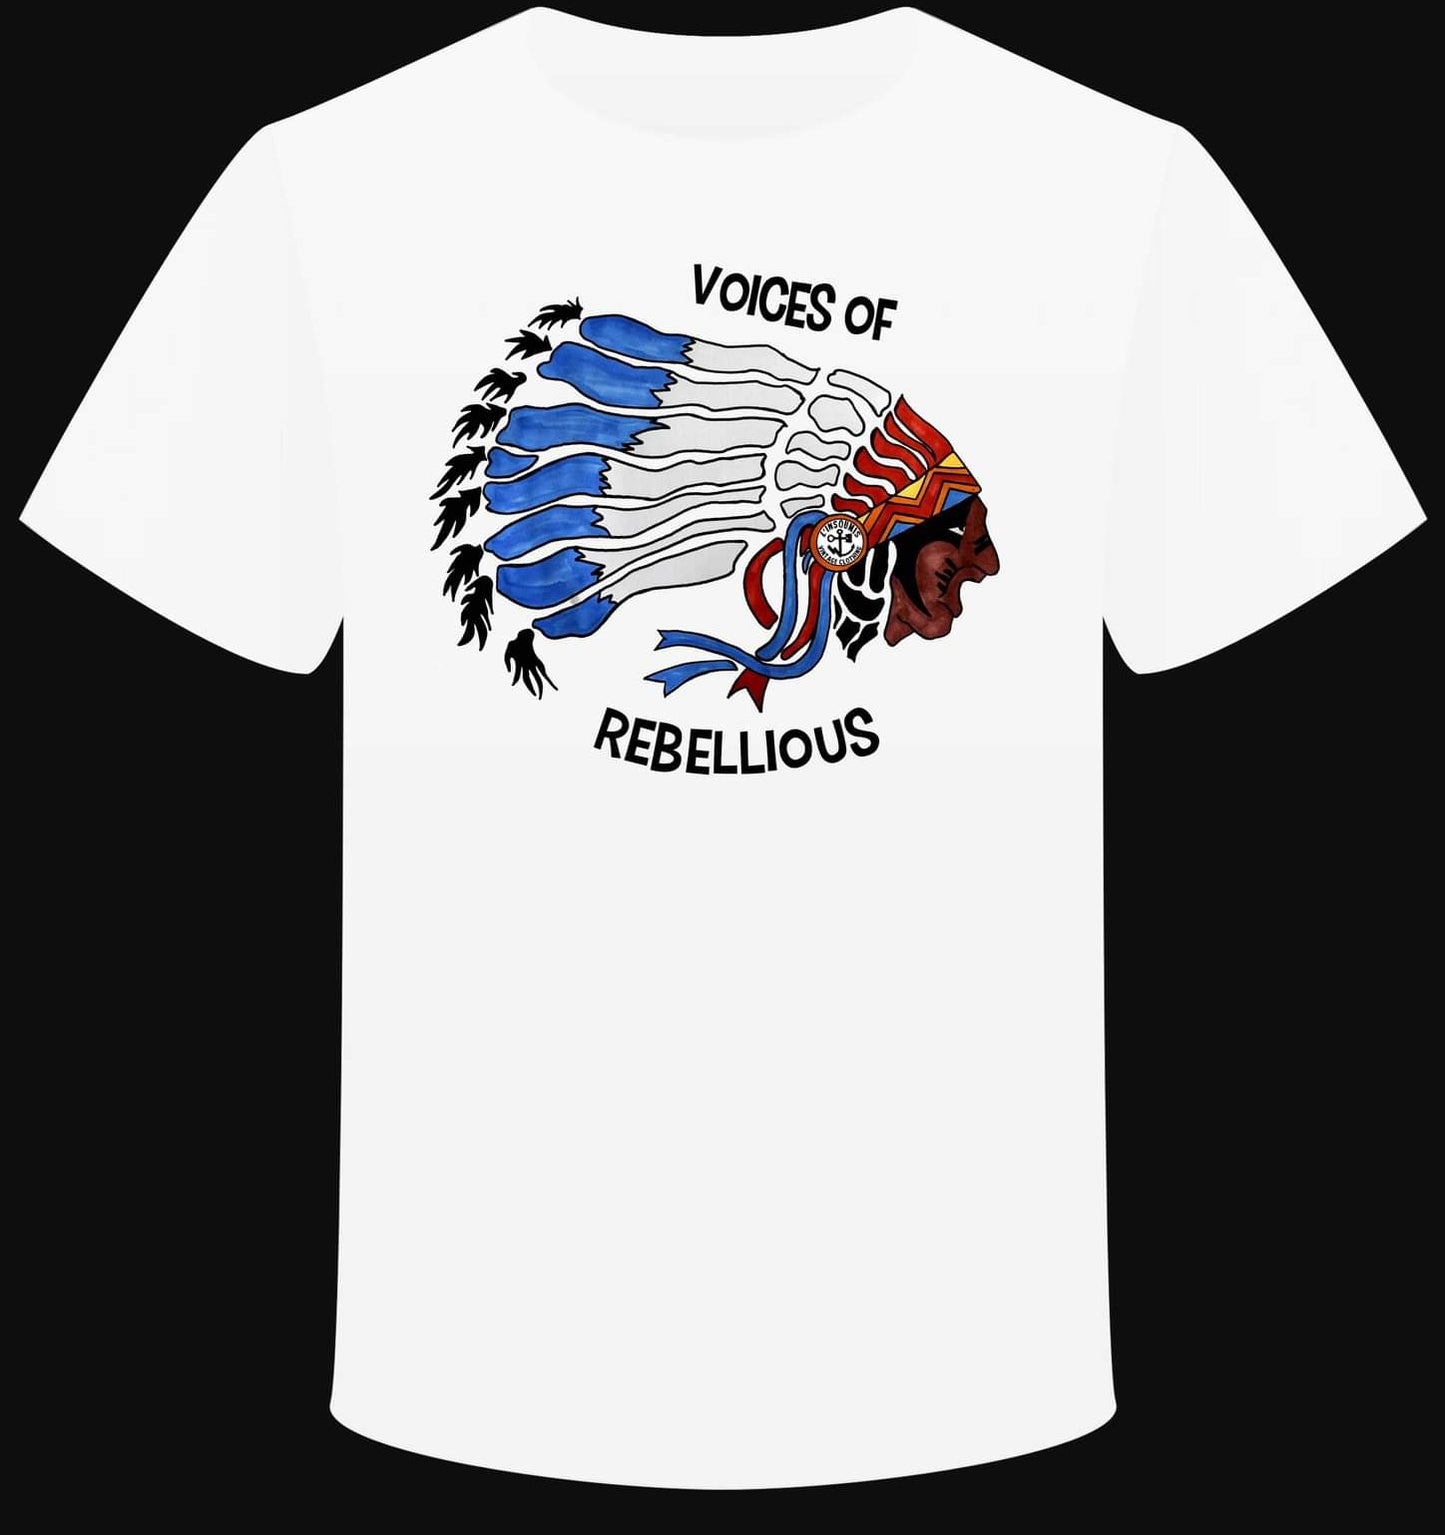 T-shirt "Voices of Rebellious"